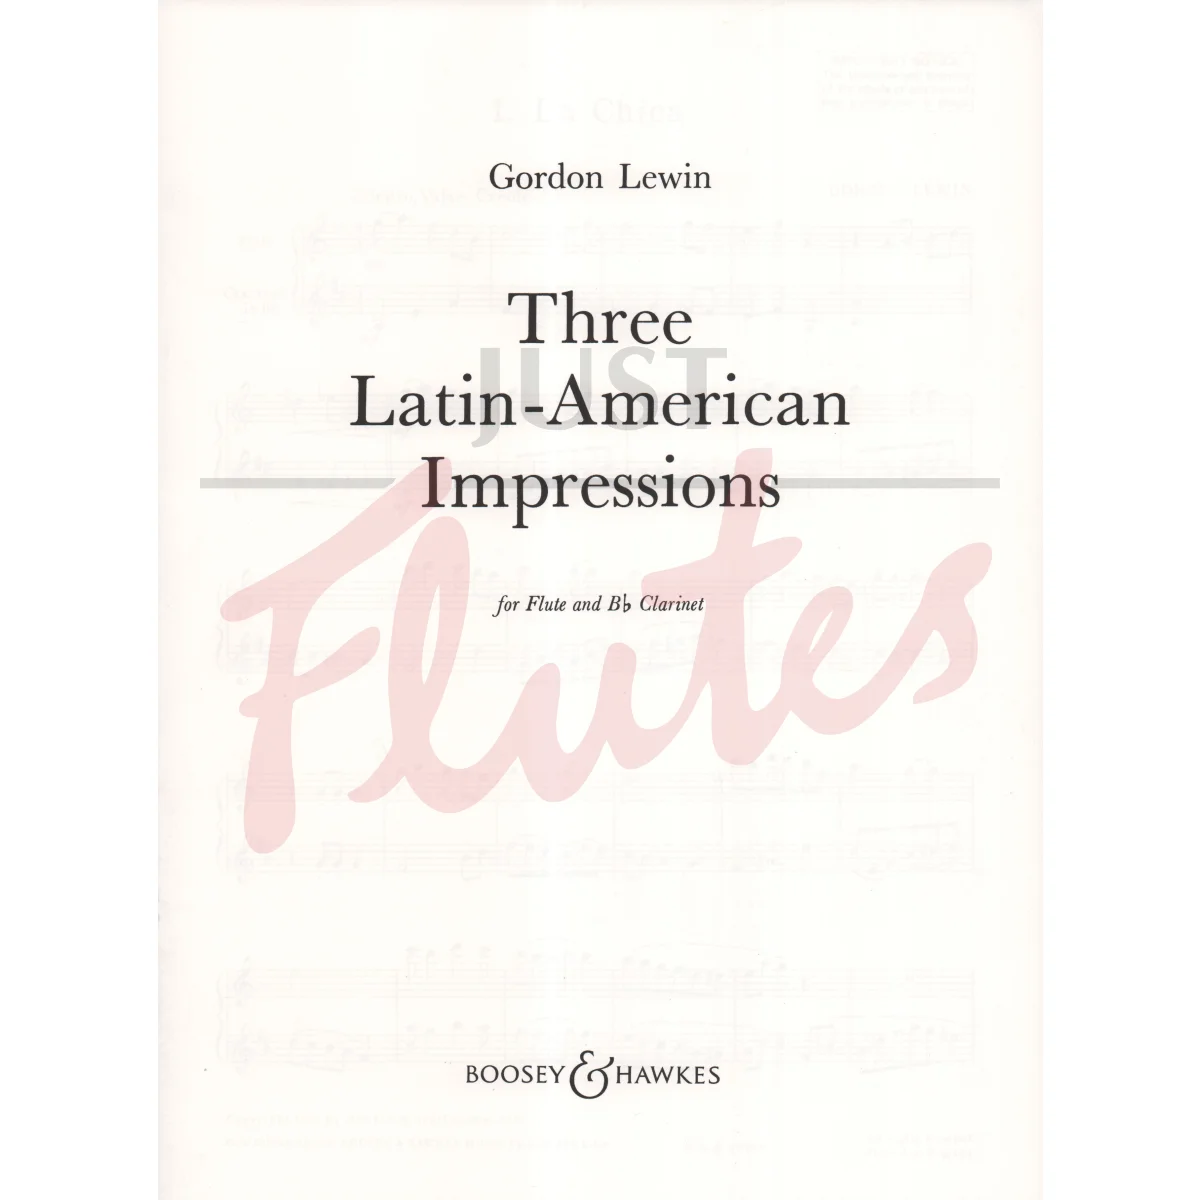 Three Latin-American Impressions for Flute and Clarinet